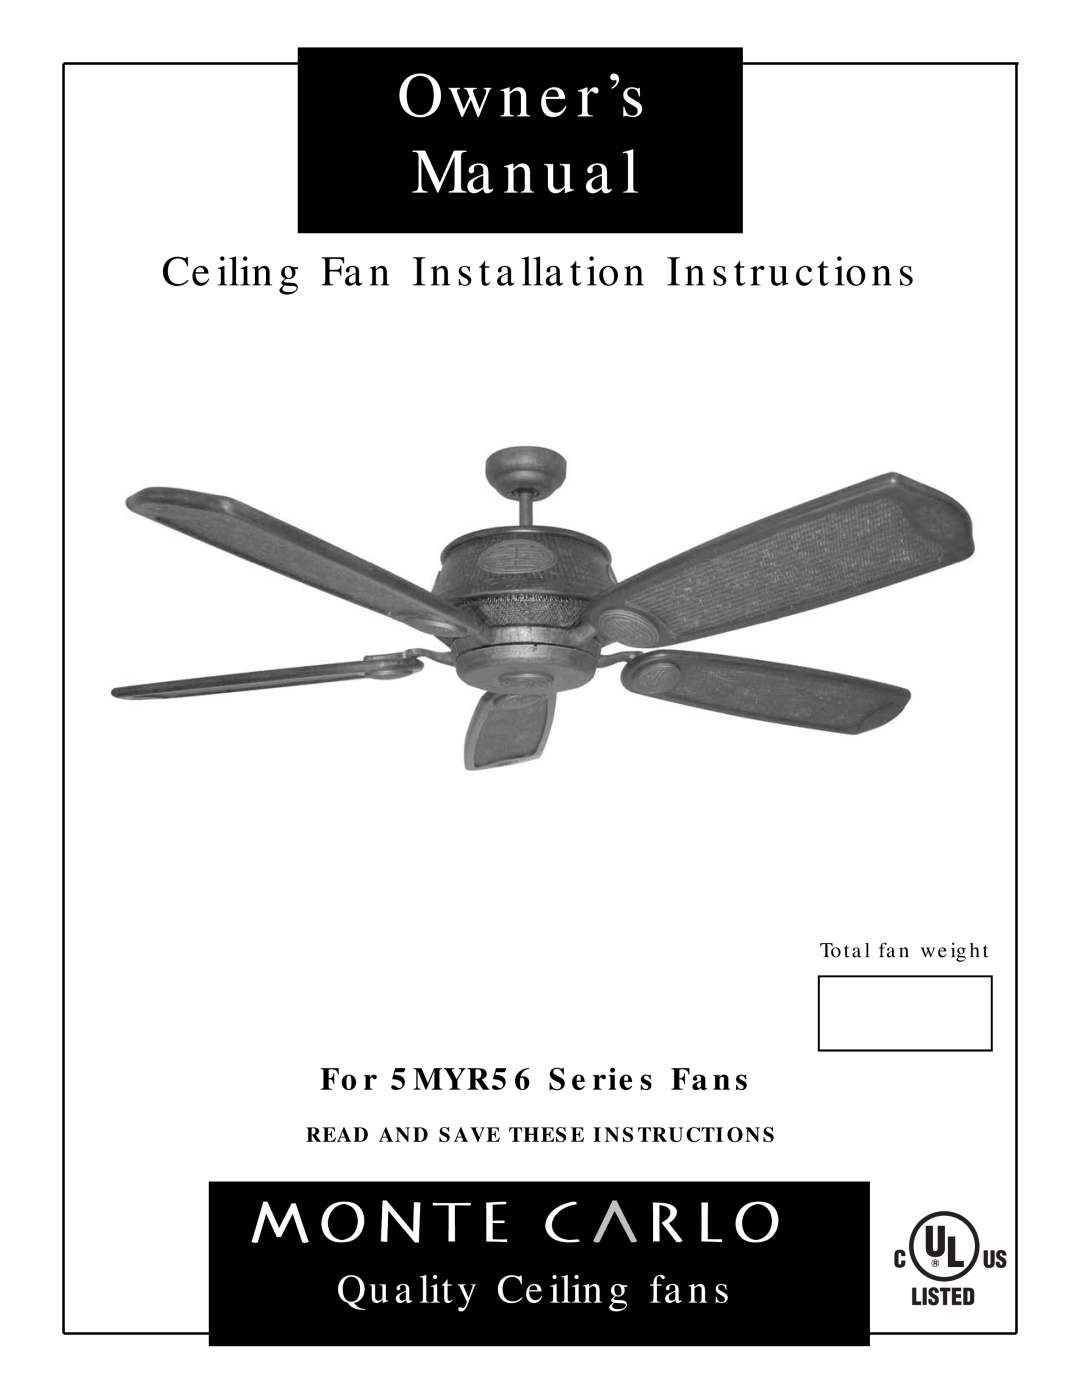 Monte Carlo Fan Company 5MYR56 owner manual Read And Save These Instructions, Ceiling Fan Installation Instructions 